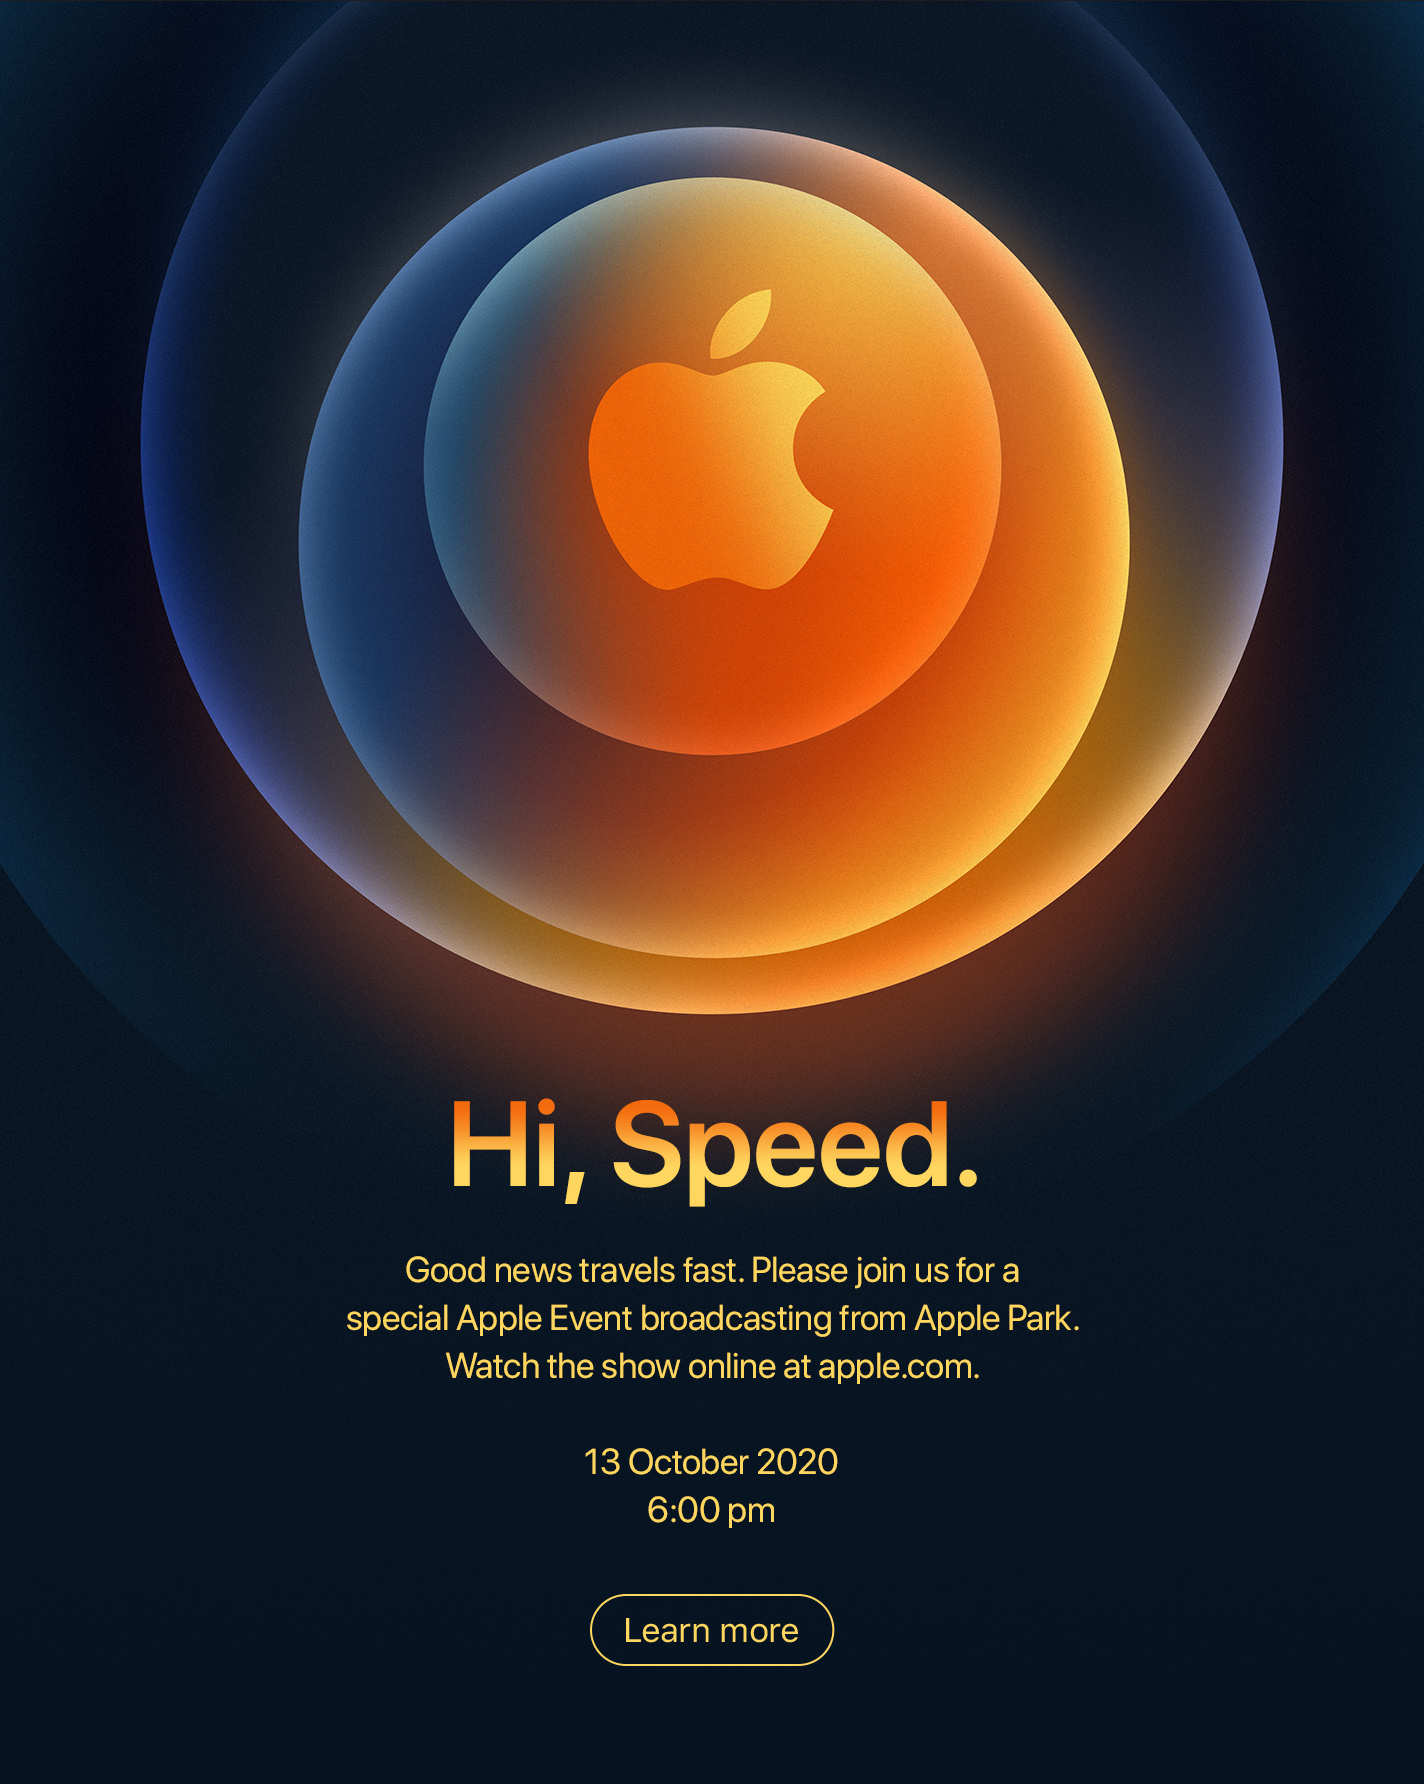 Hi, Speed. Good news travels fast. Please join us for a special Apple Event broadcasting from Apple Park. Watch the show online at apple.com. 13 October 2020 6:00 pm Learn more